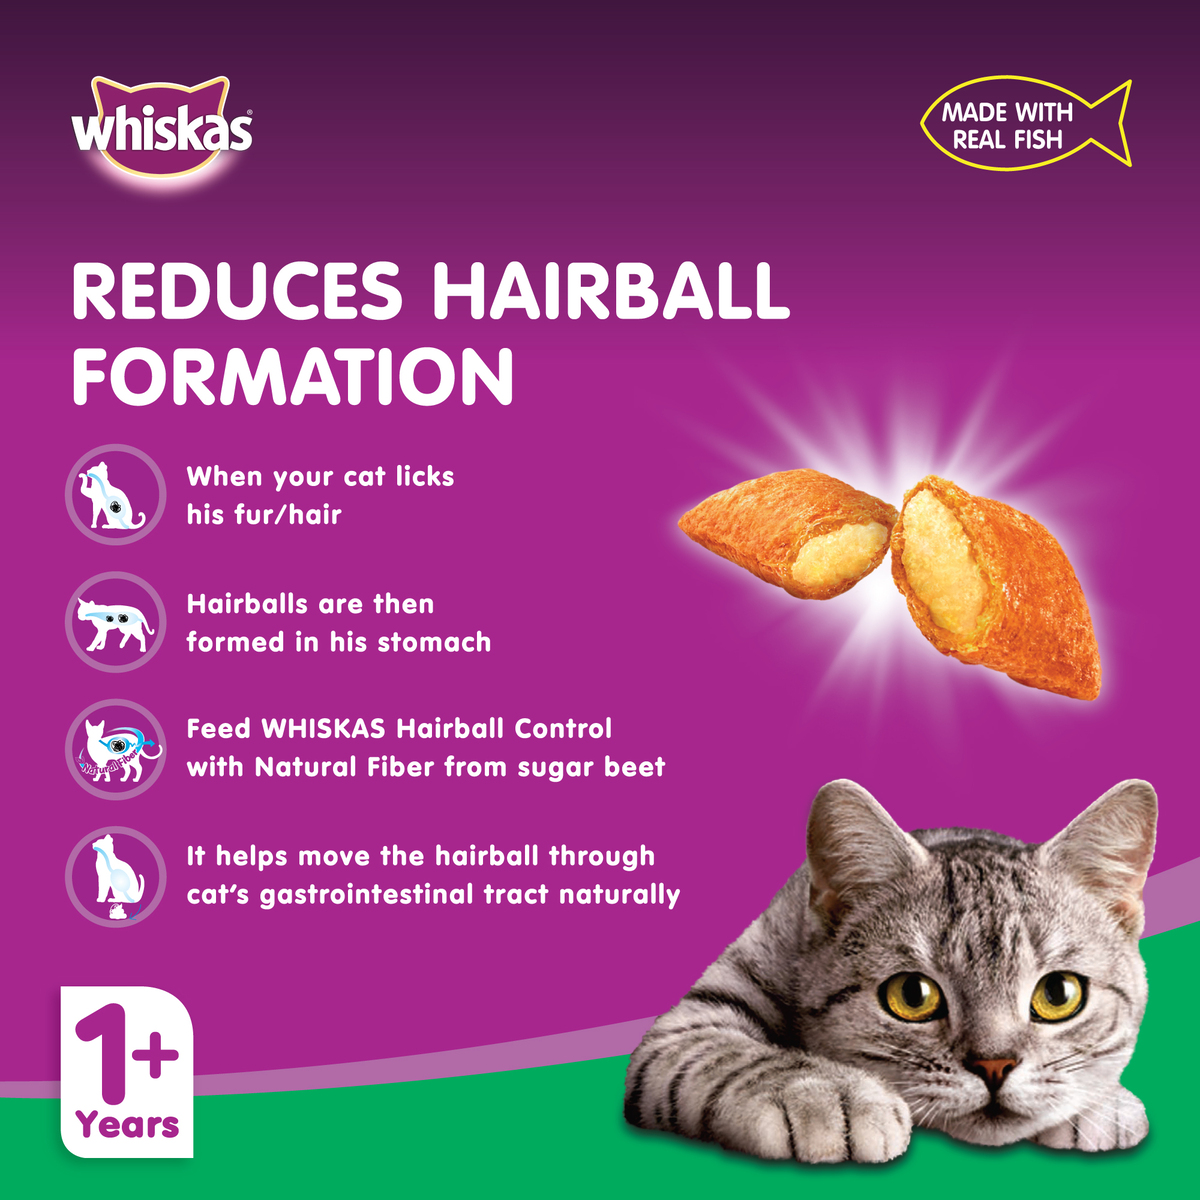 Whiskas Chicken & Tuna Hairball Control Dry Food for Adult Cats 1.1 kg